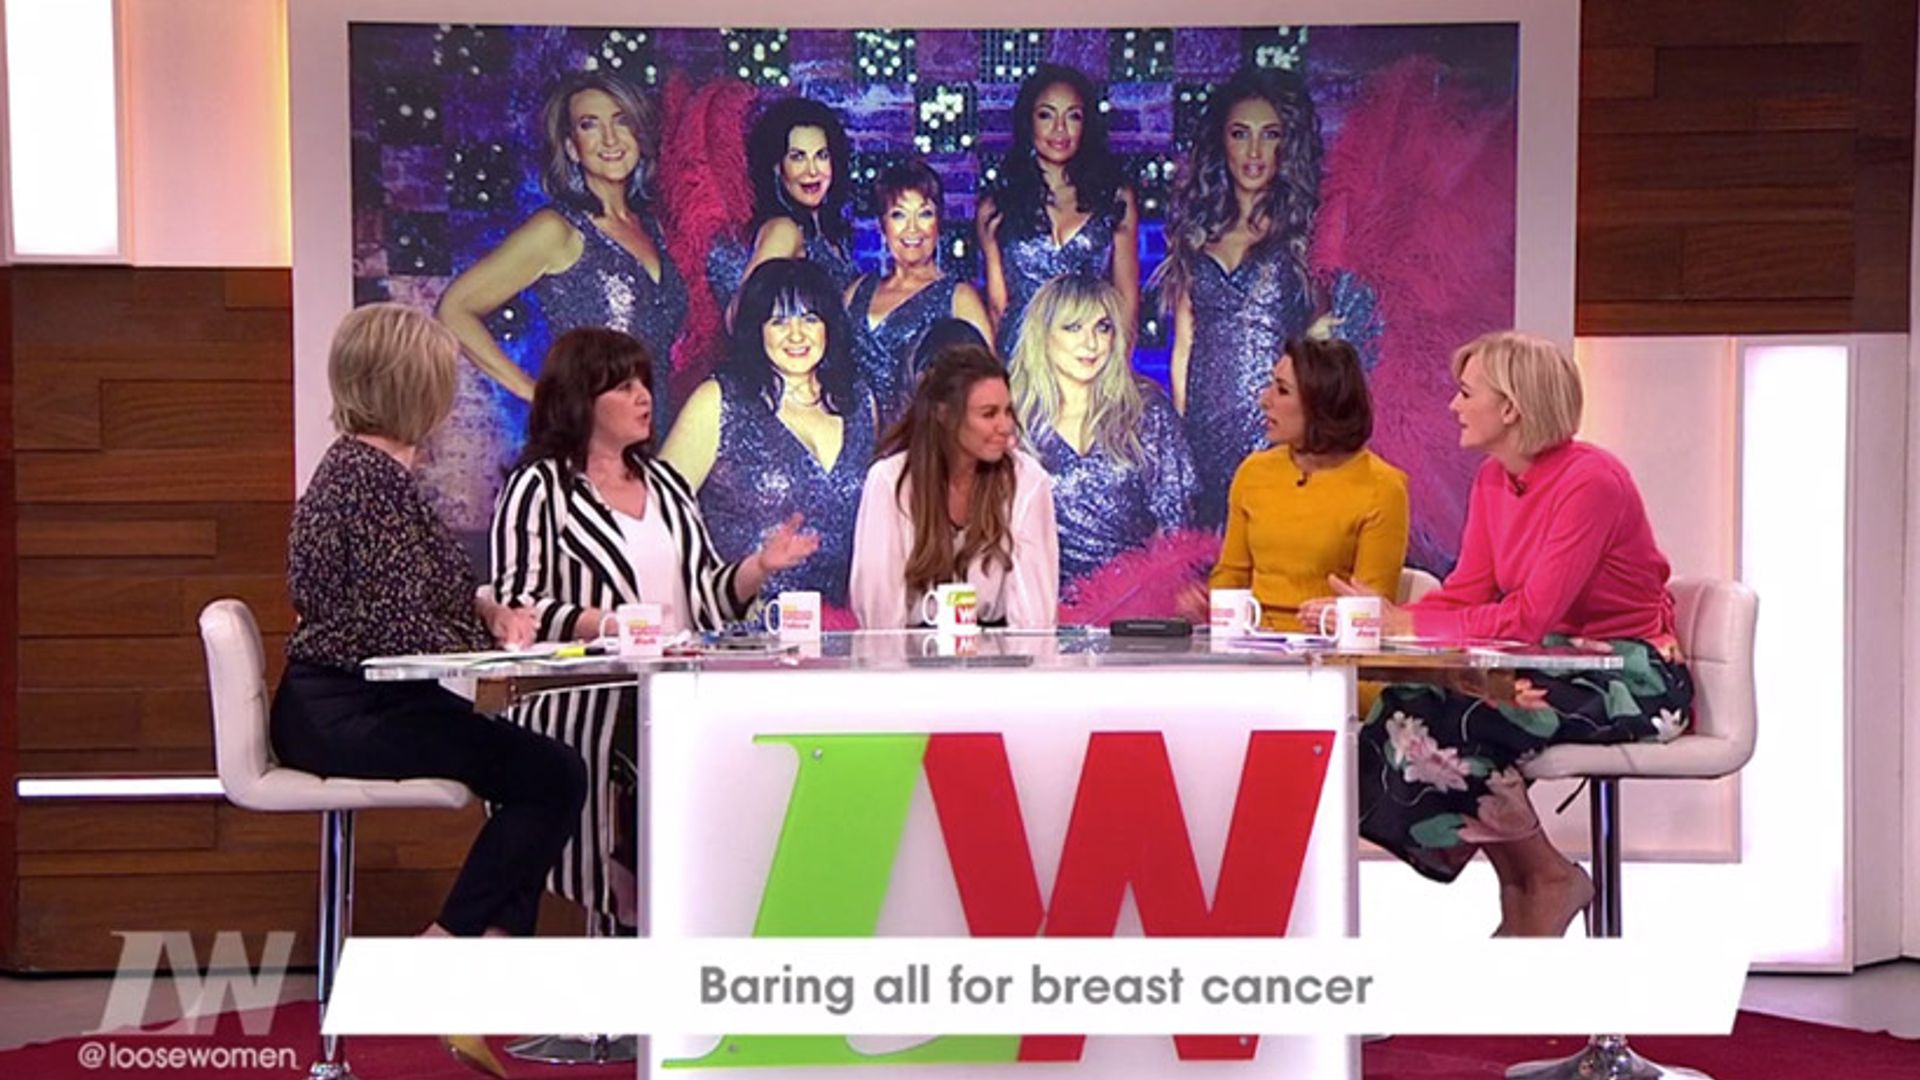 Michelle Heaton opens up about baring all for breast cancer: 'Initially, I said no'